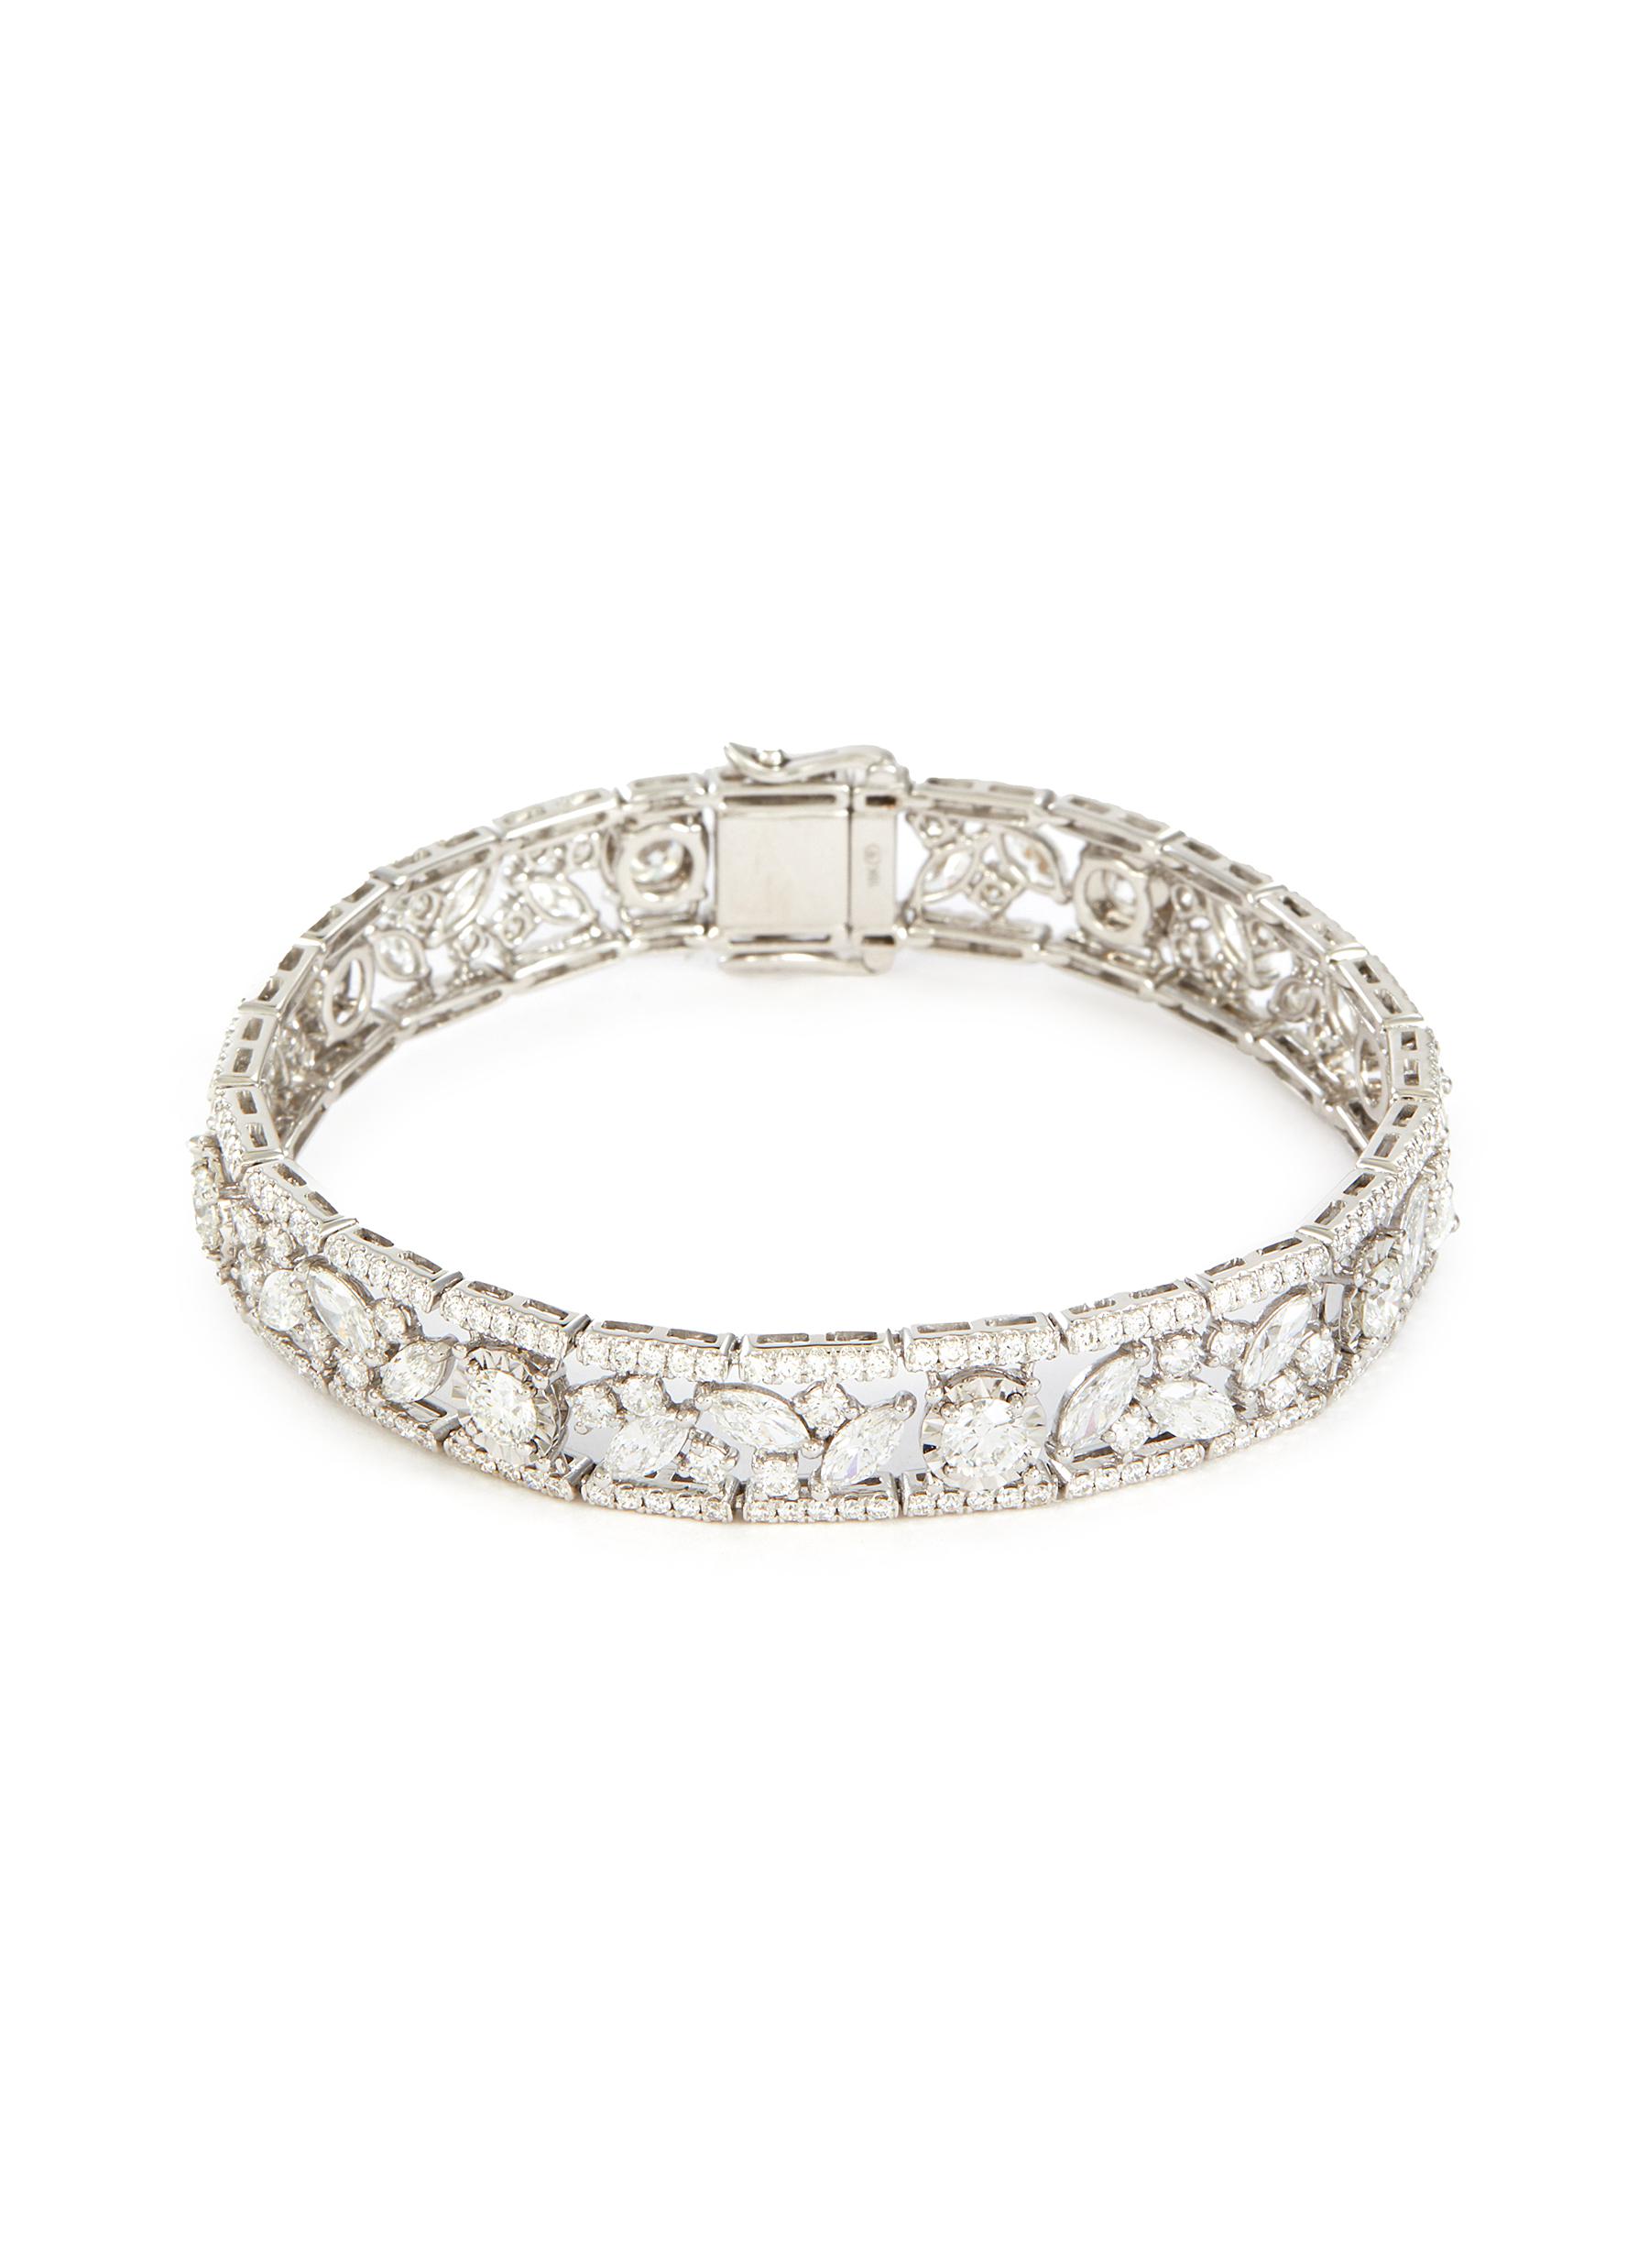 Diamond Bangle Buying Guide: Top Five Things To Consider